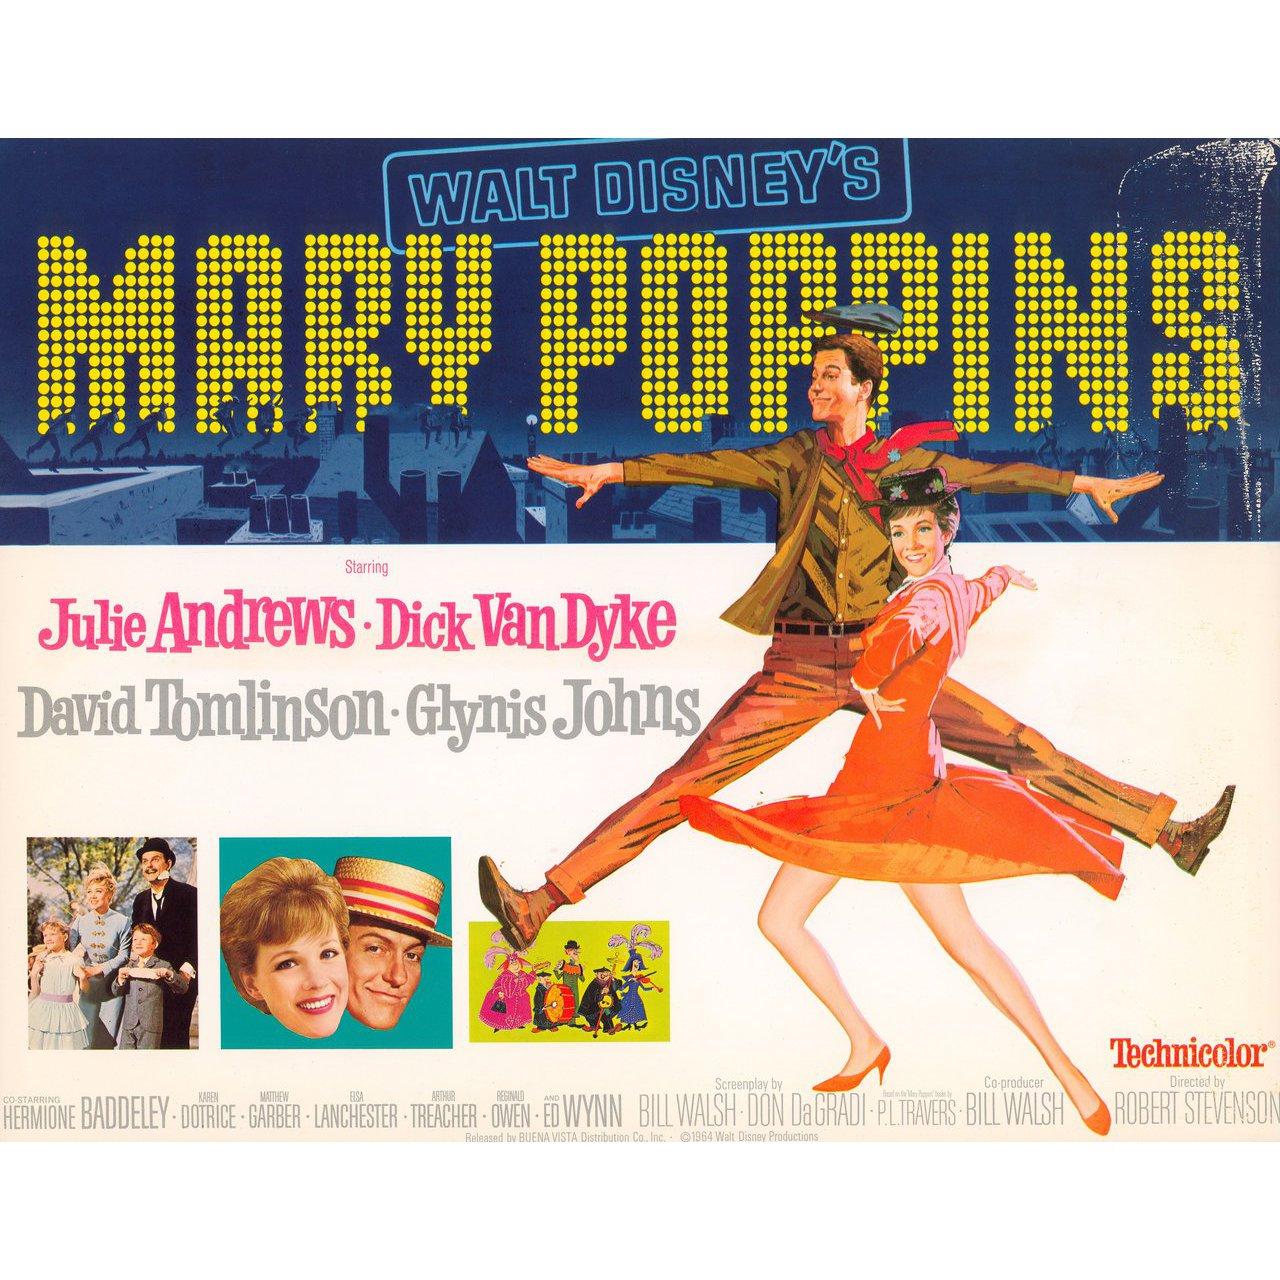 Original 1964, U.S. title card for the film Mary Poppins directed by Robert Stevenson with Julie Andrews / Dick Van Dyke / David Tomlinson / Glynis Johns. Fine condition. Please note: the size is stated in inches and the actual size can vary by an